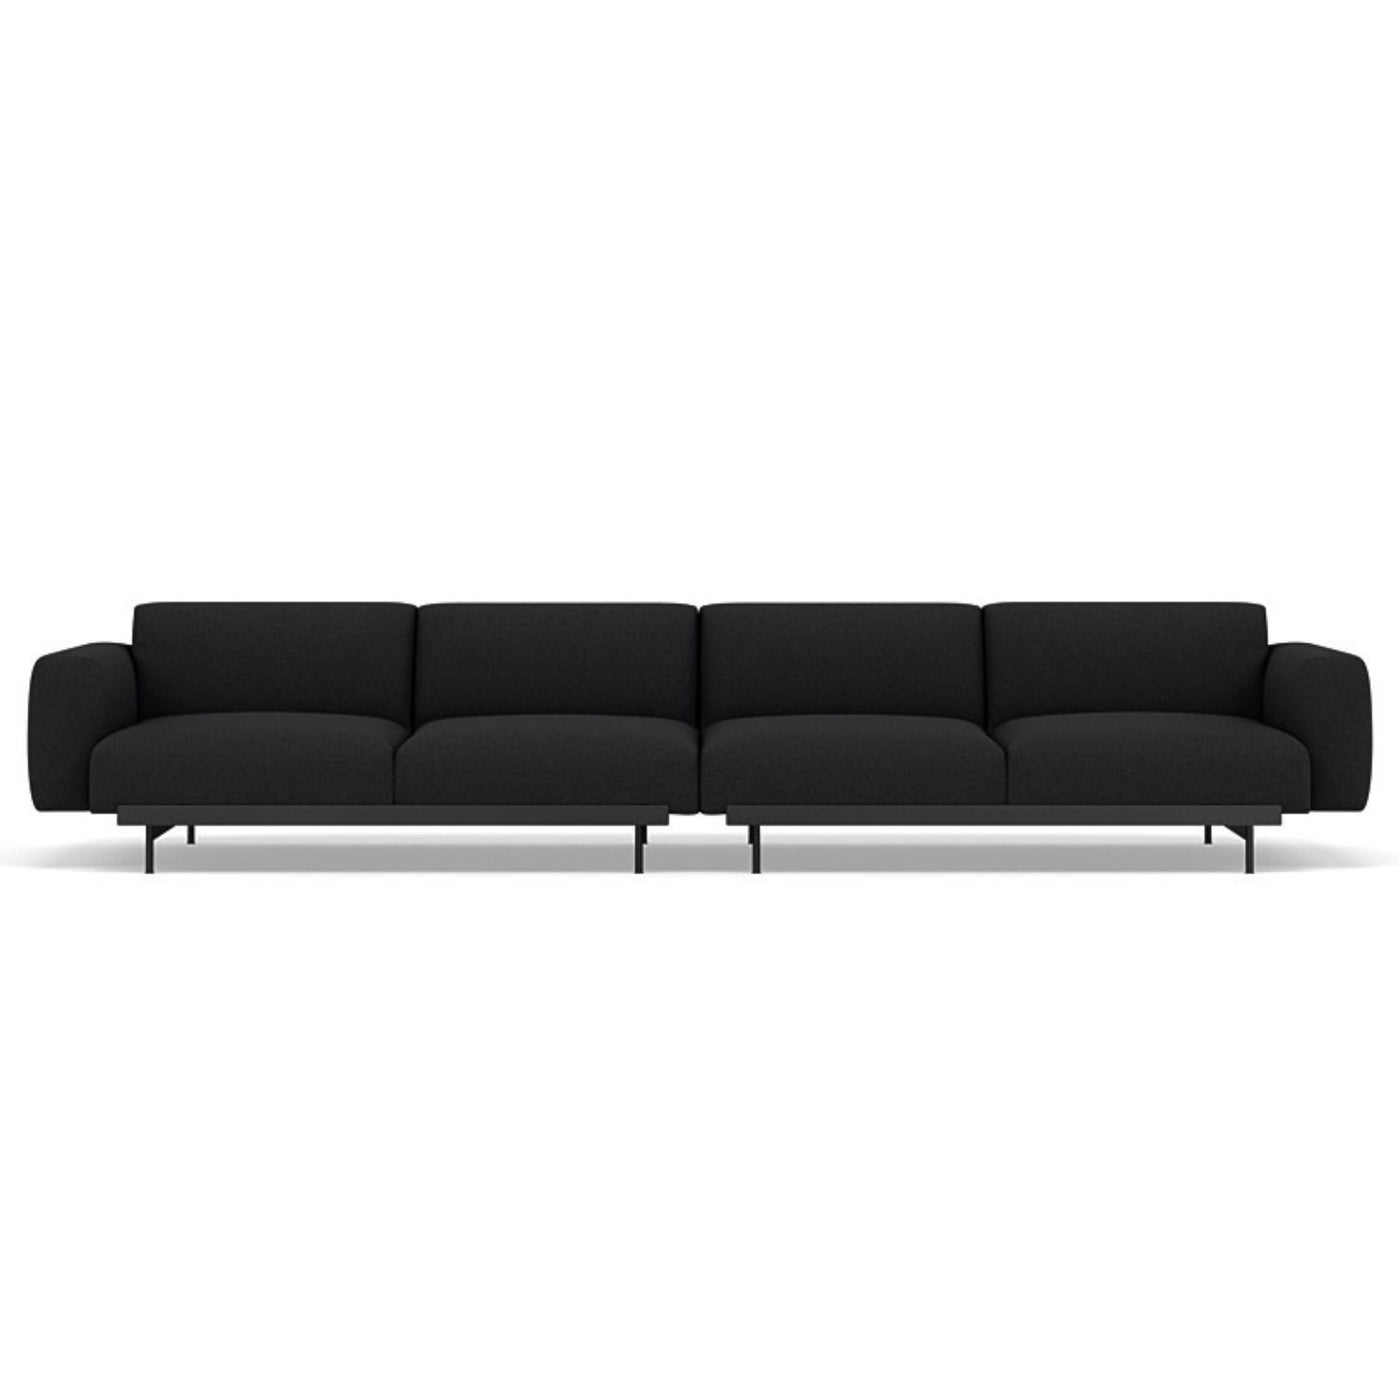 Muuto In Situ Modular 4 Seater Sofa configuration 1. Made to order from someday designs. #colour_divina-md-193